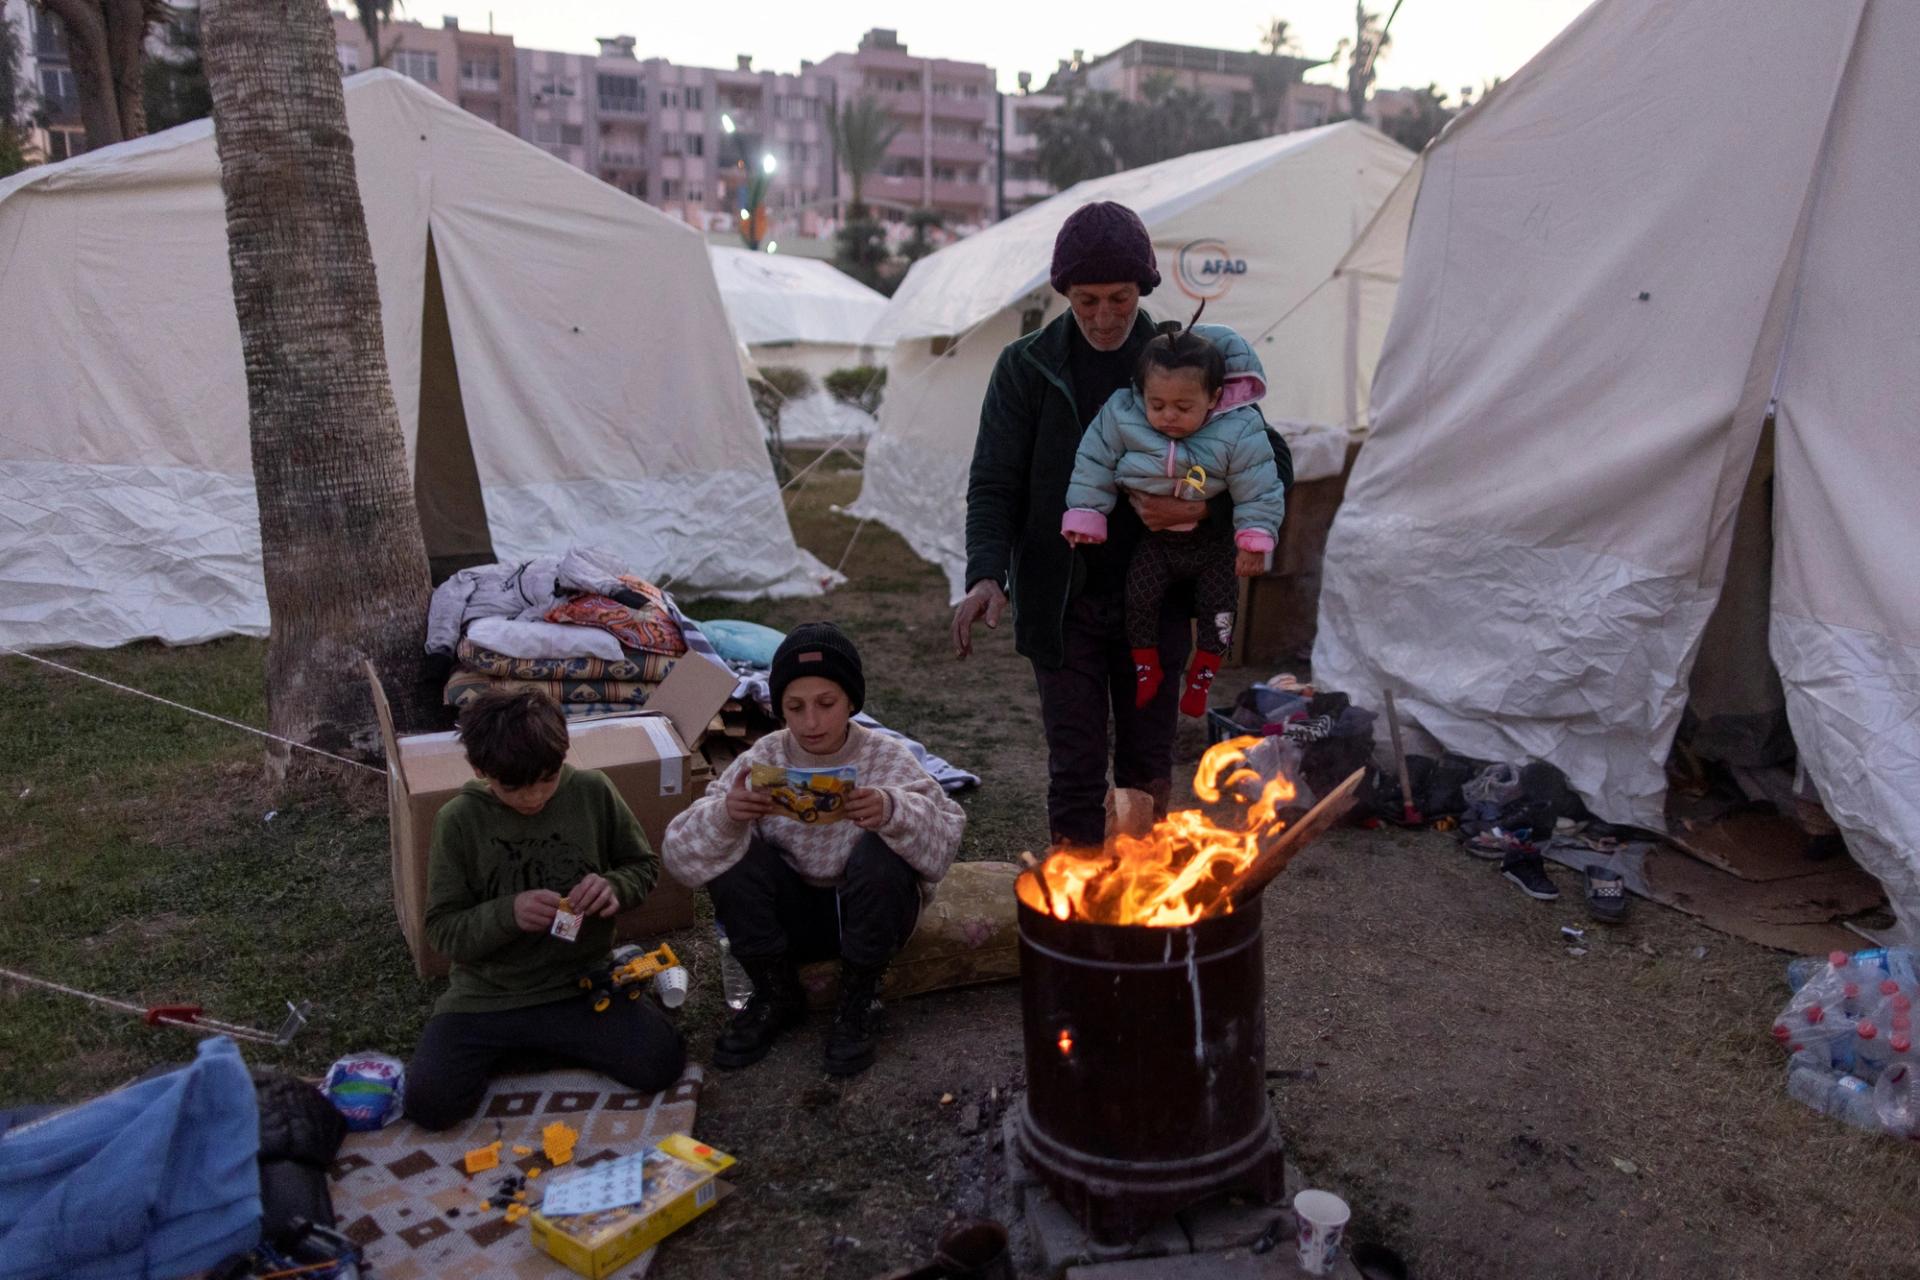 A Syrian family gathers around a fire for warmth, at a park turned into a camp for displaced people, following the deadly earthquake, in Iskenderun city, Hatay province, Turkey, February 14, 2023